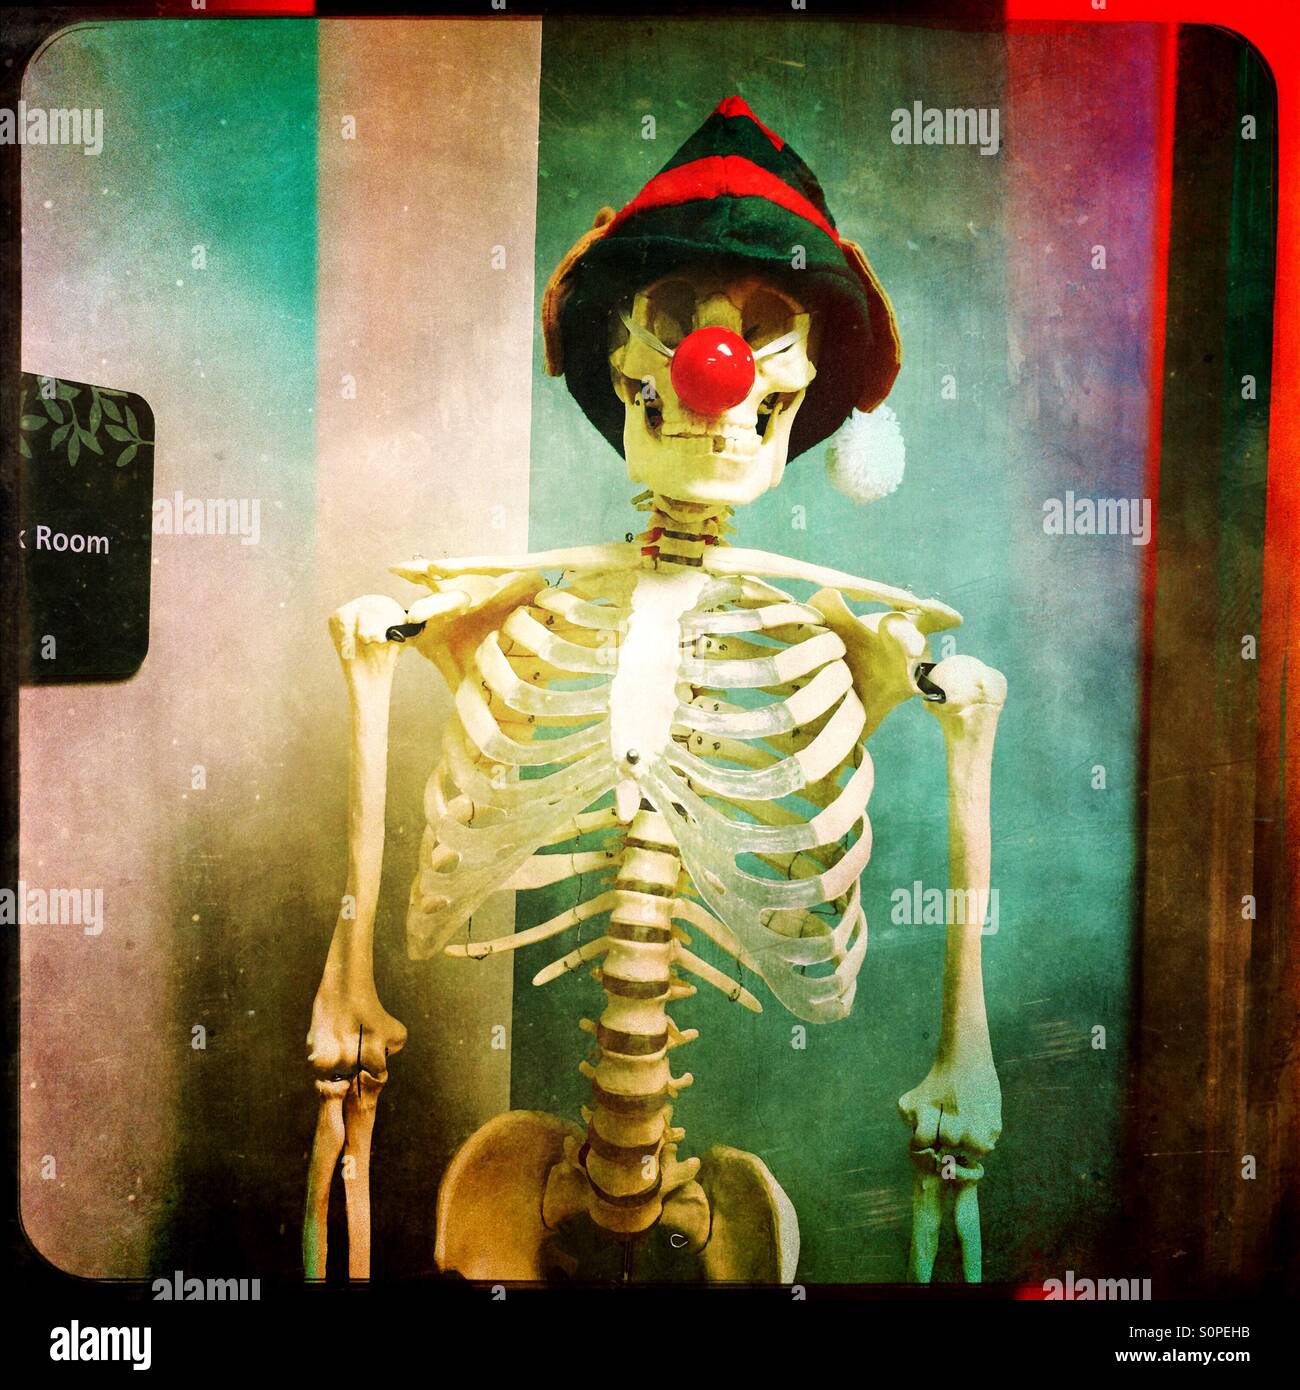 A skeleton dressed as Rudolph the Red Nosed Reindeer for the holiday. Stock Photo